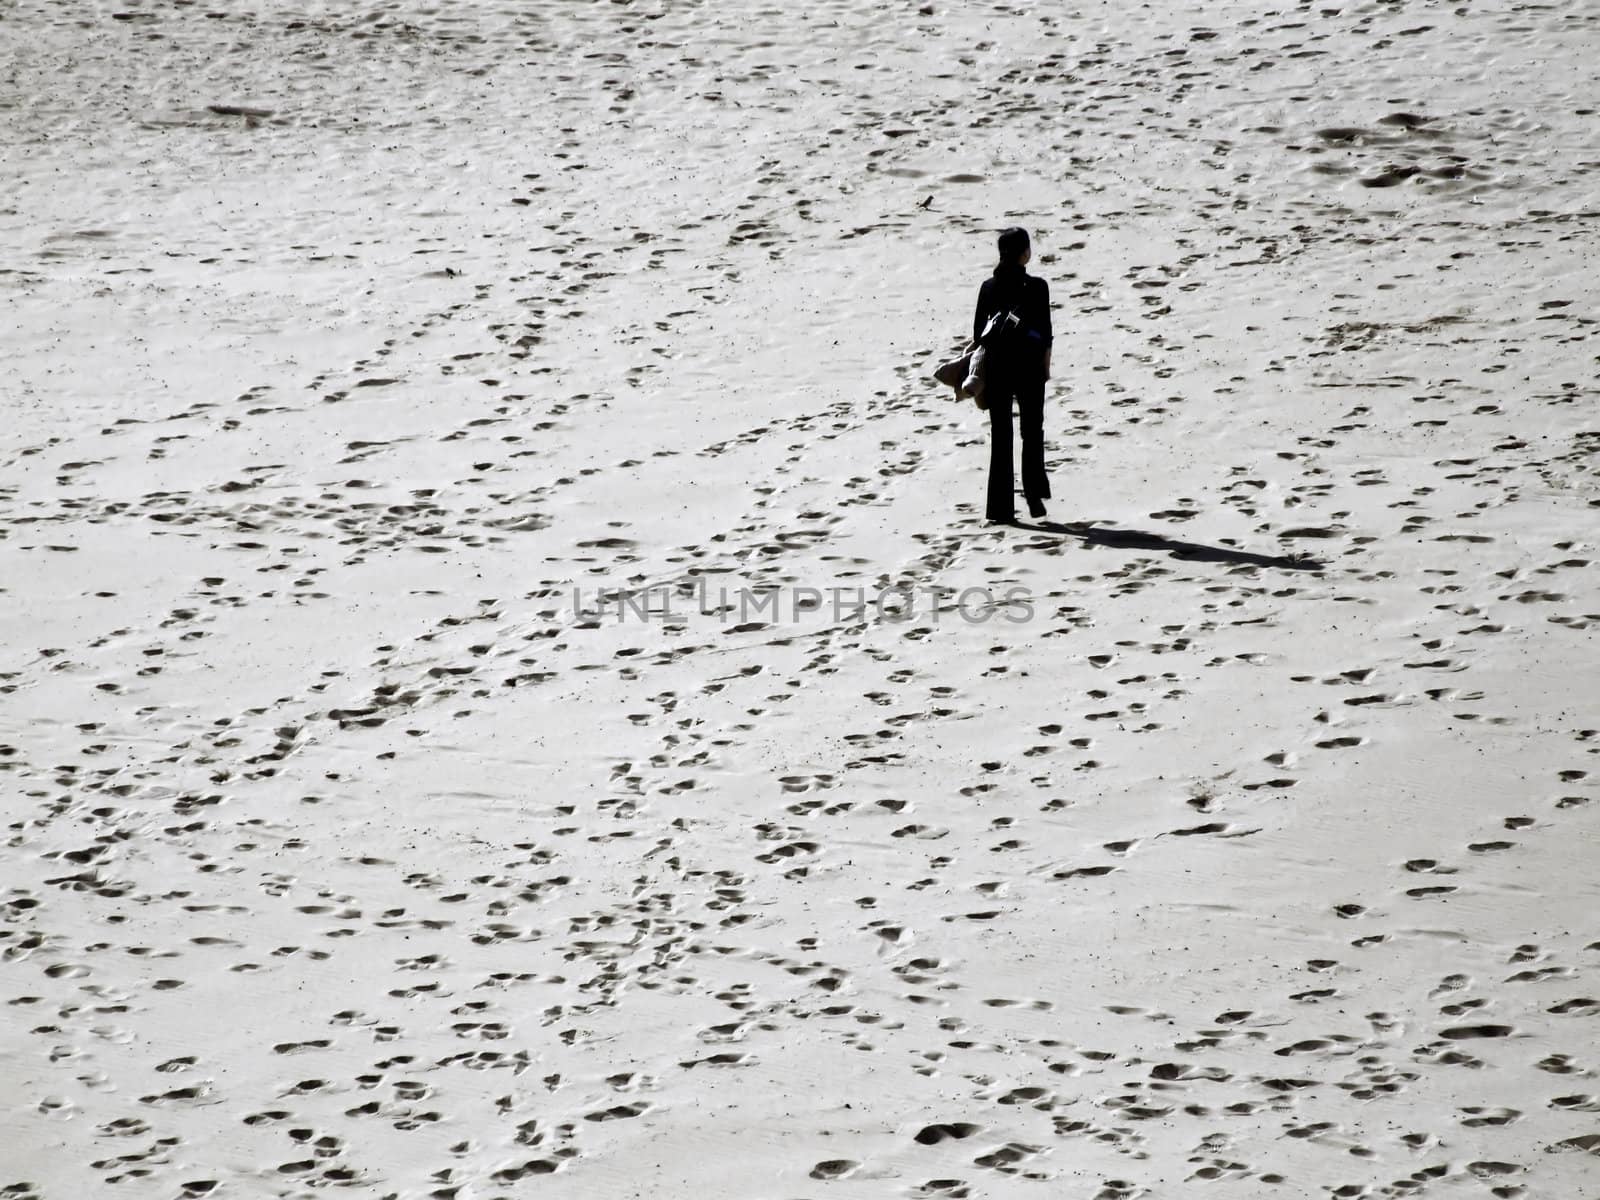 Lone woman lost amidst various tracks and directions in sand